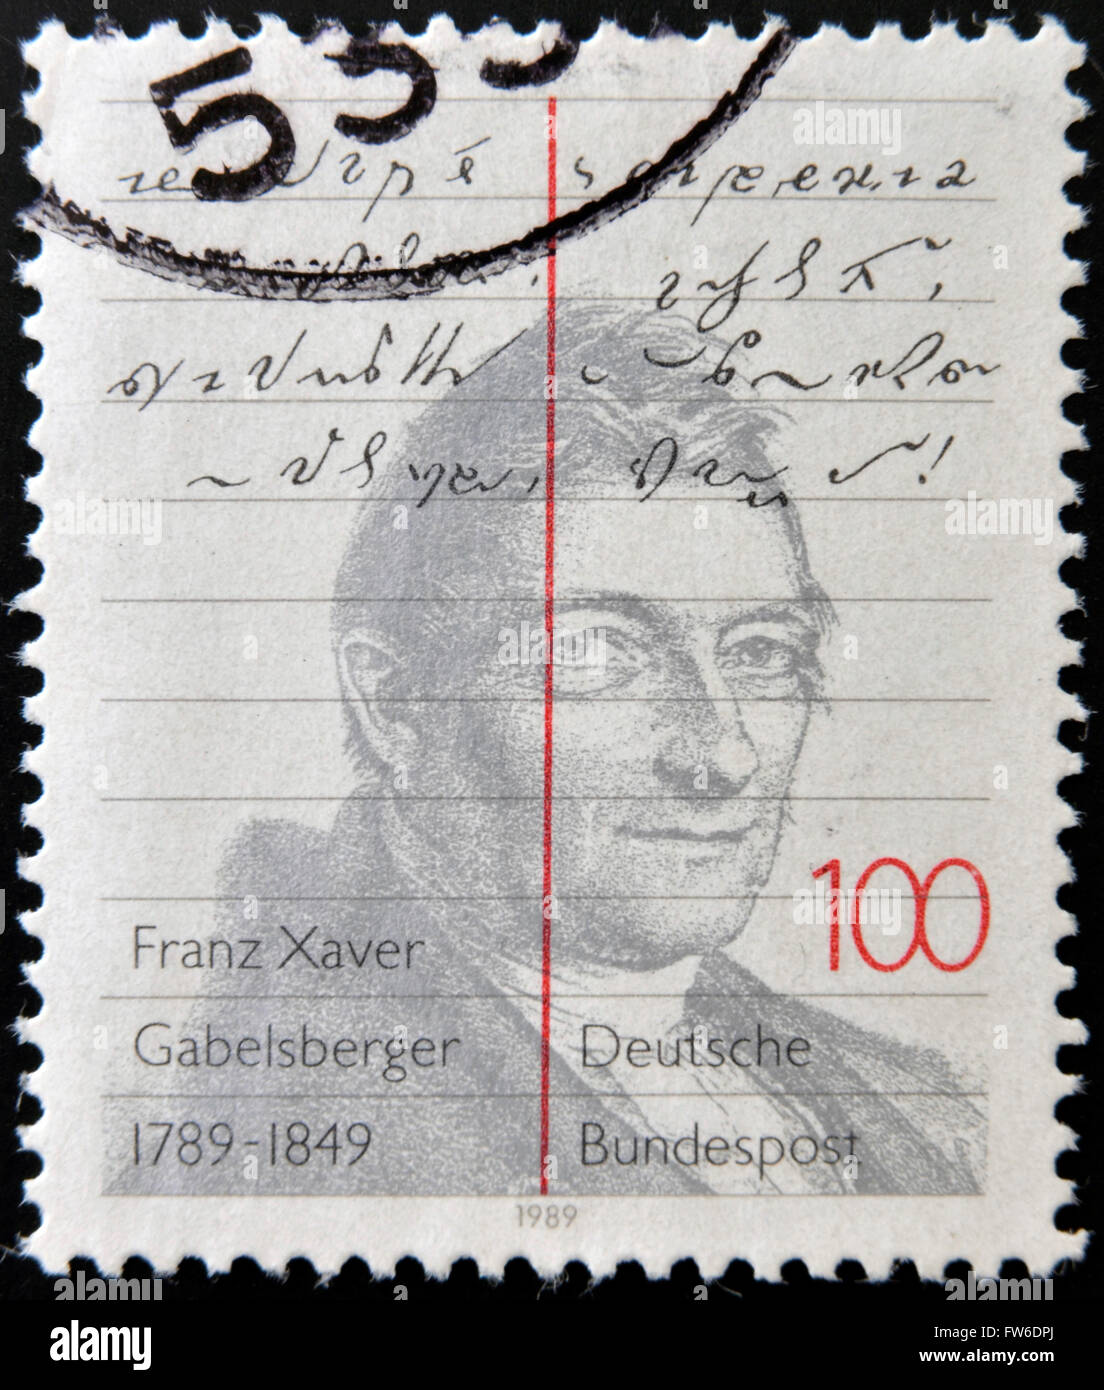 GERMANY - CIRCA 1989: A stamp printed in Germany shows Franz Xaver Gabelsberger, circa 1989 Stock Photo